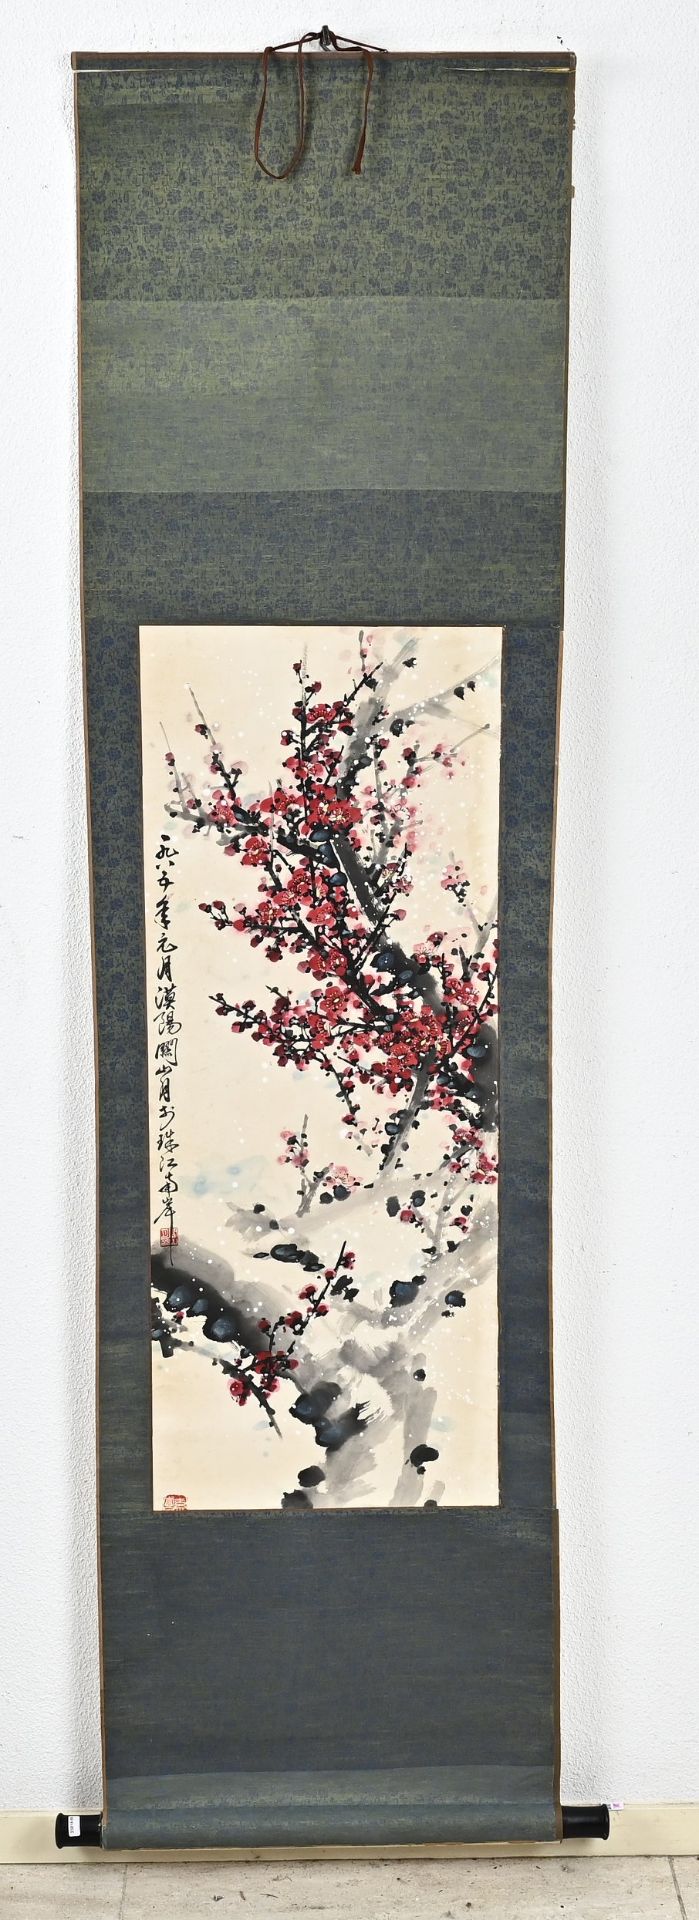 Chinese scroll painting, 94 x 36.5 cm.